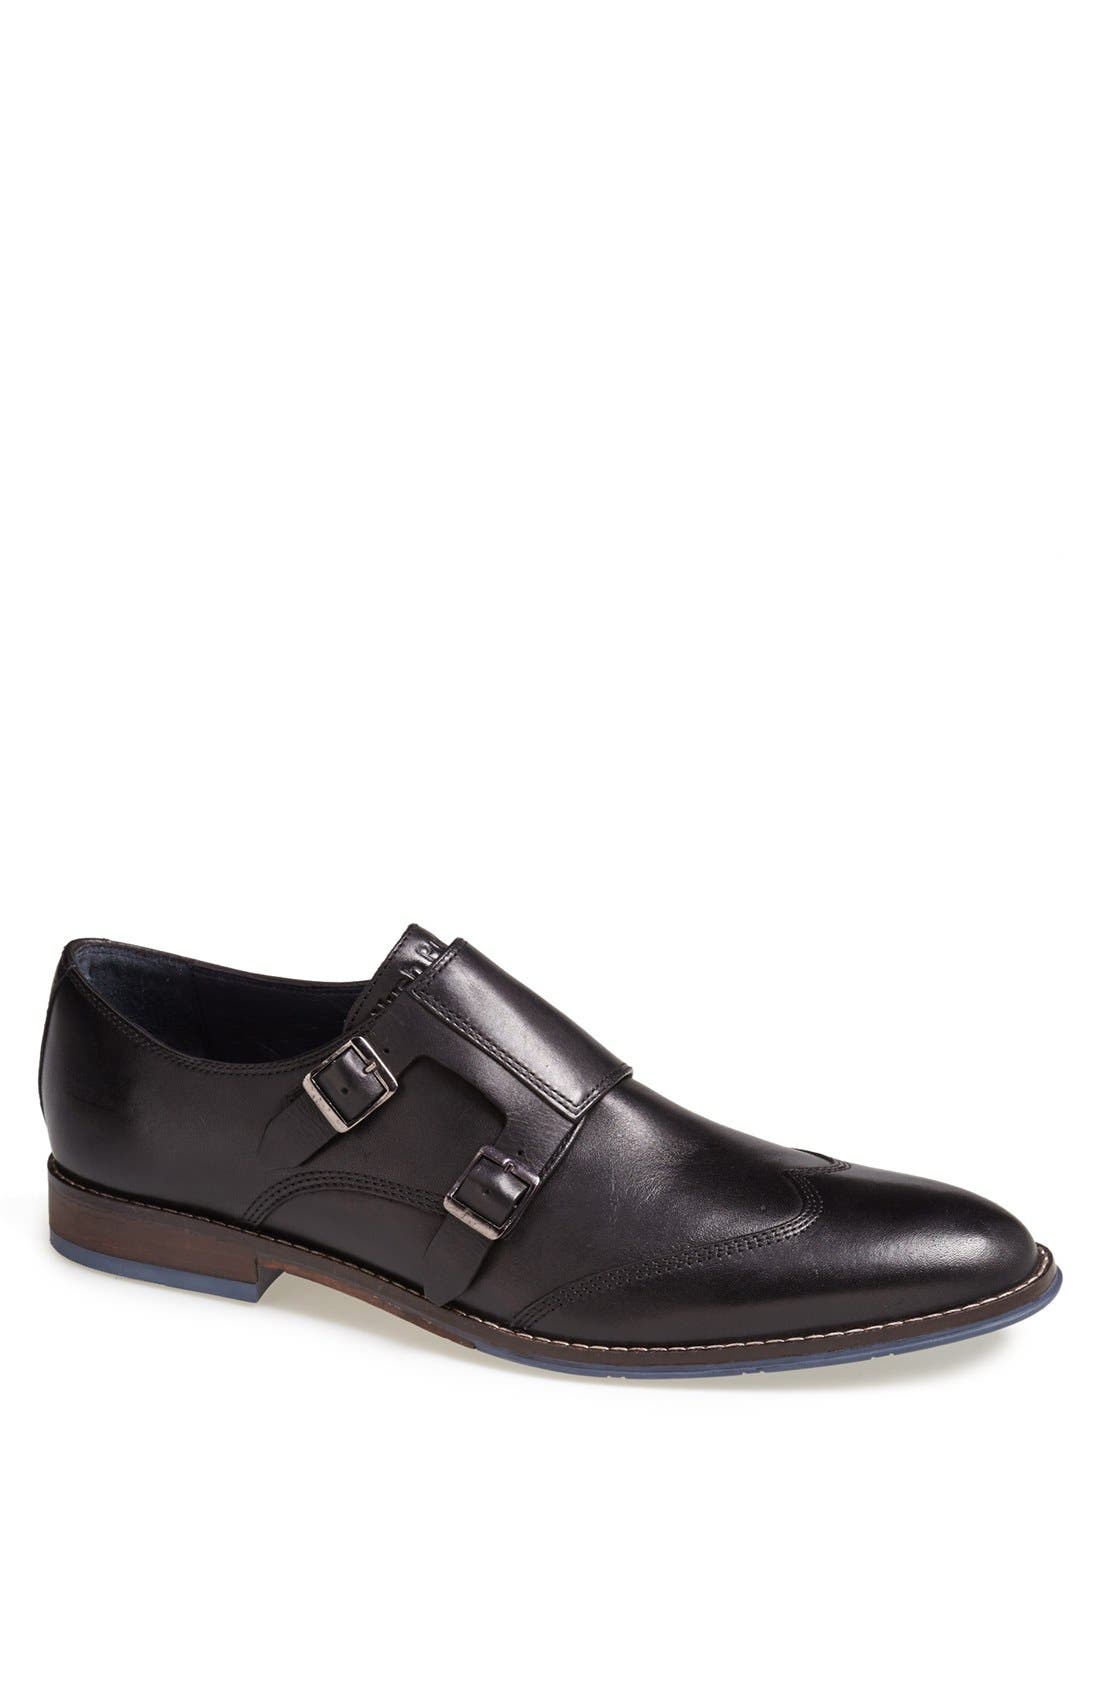 hush puppies double monk strap